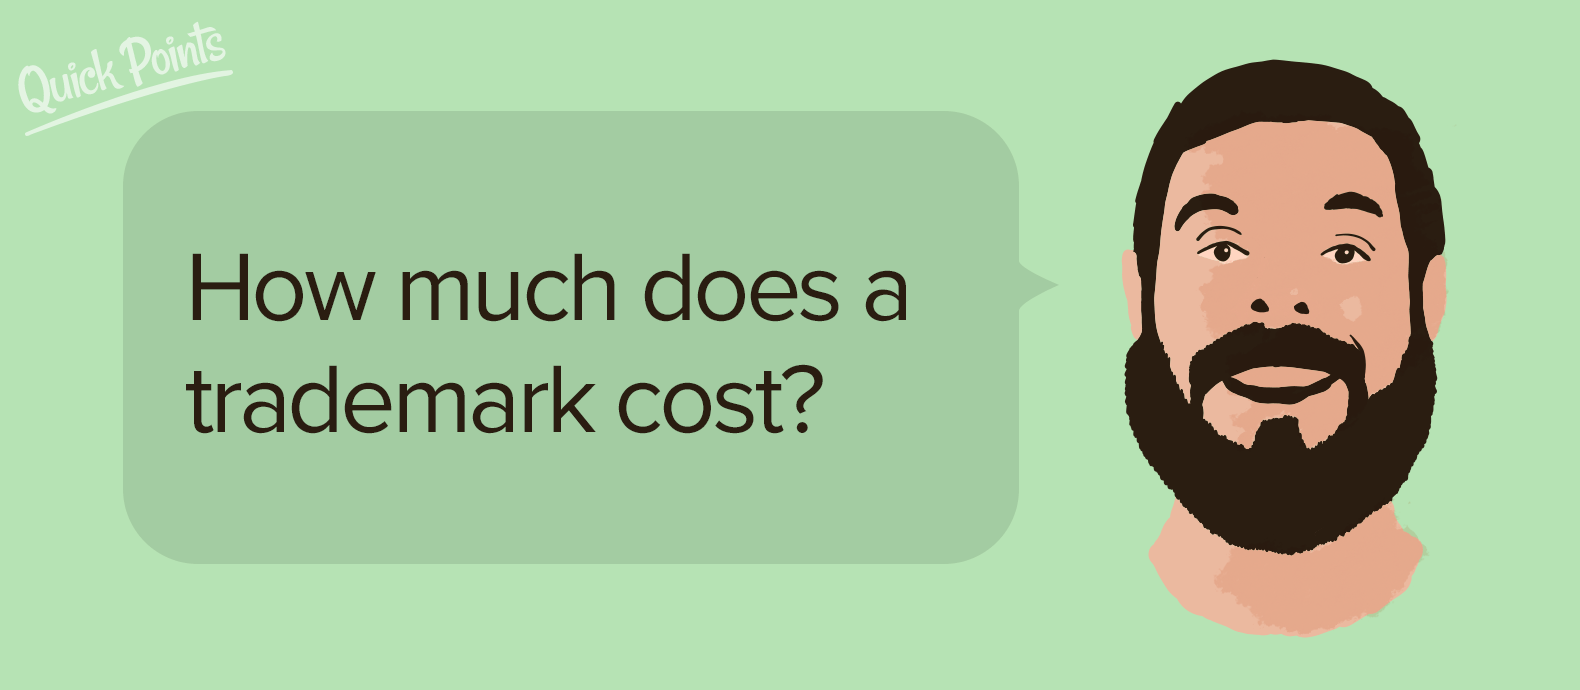 Quick Points: How much does a trademark cost?